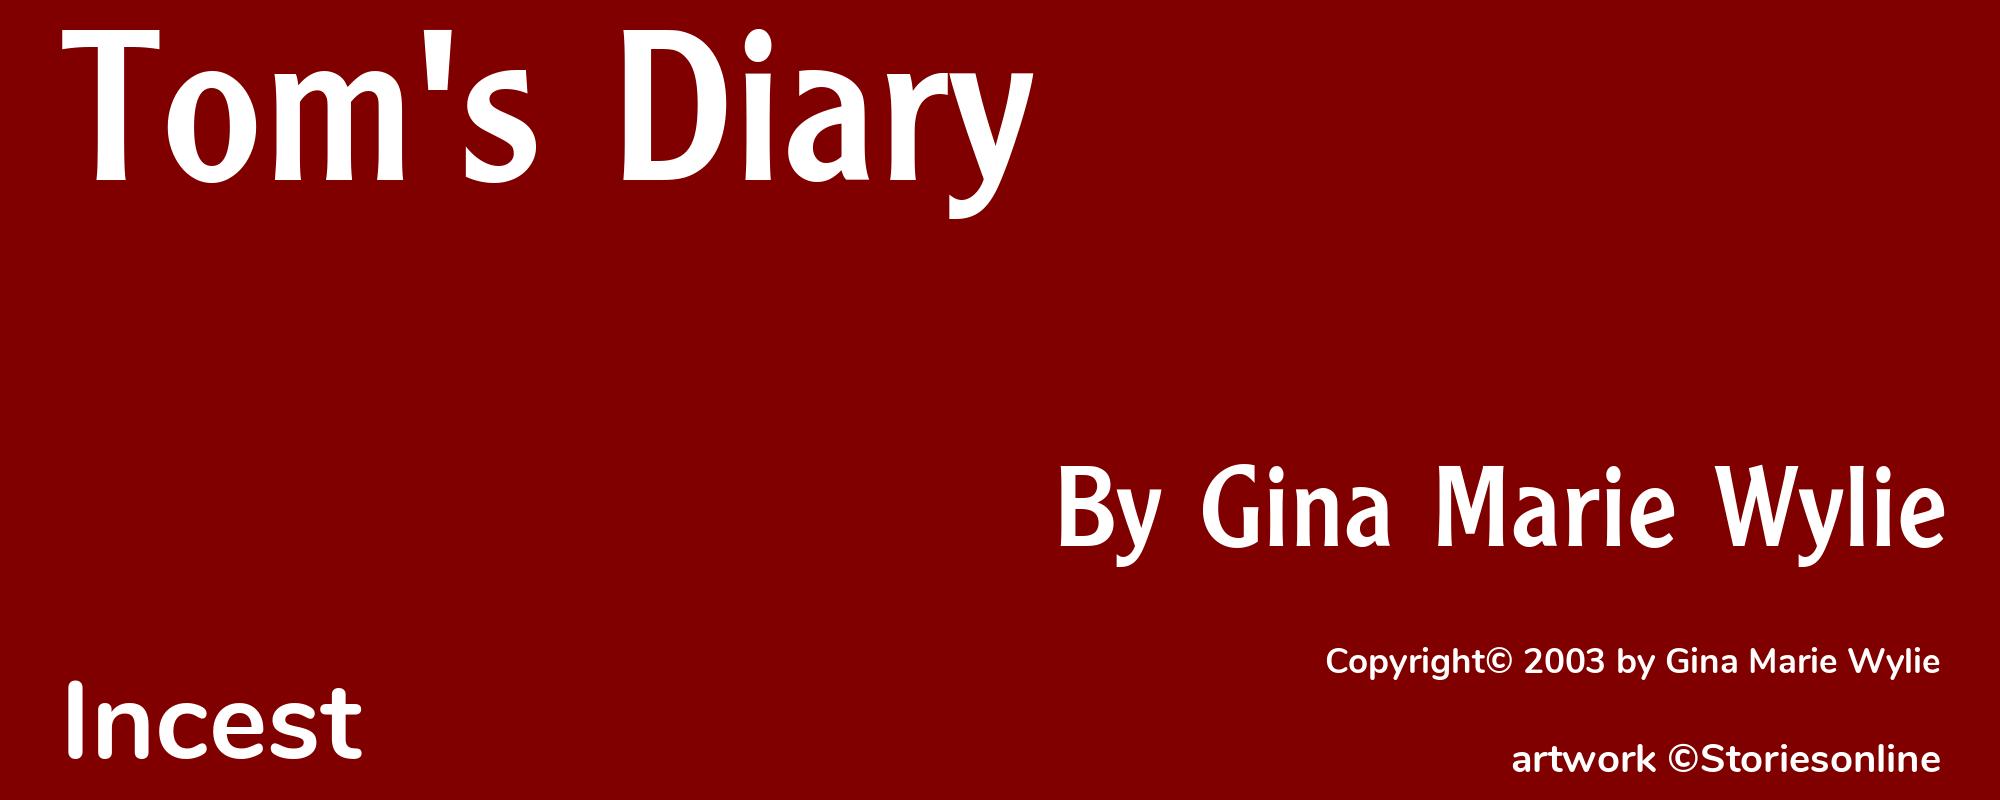 Tom's Diary - Cover